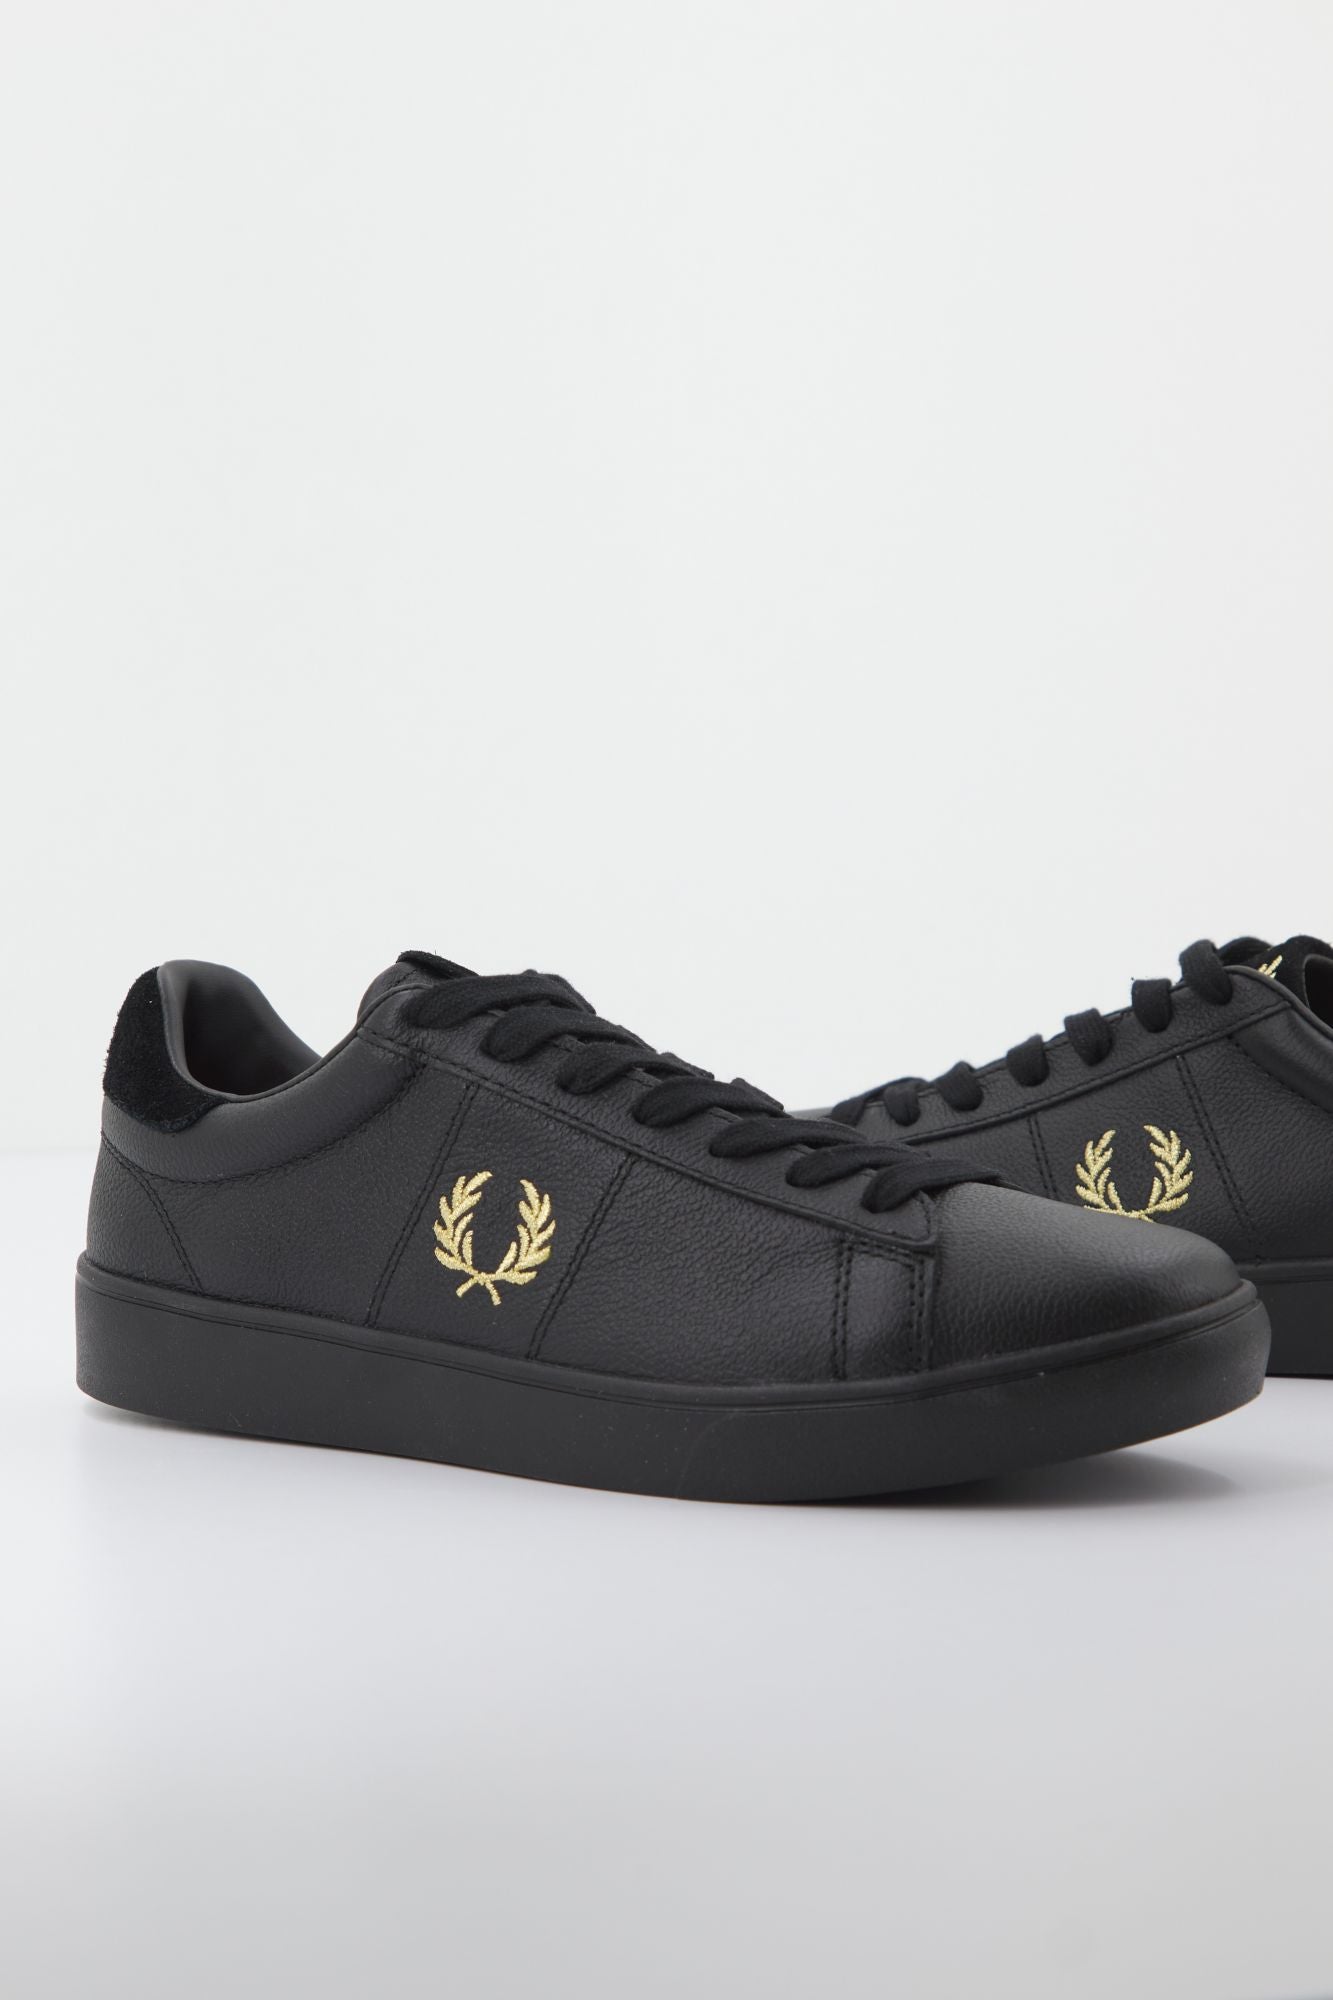 FRED PERRY SPENCER TUMBLED LTH en color NEGRO (4)